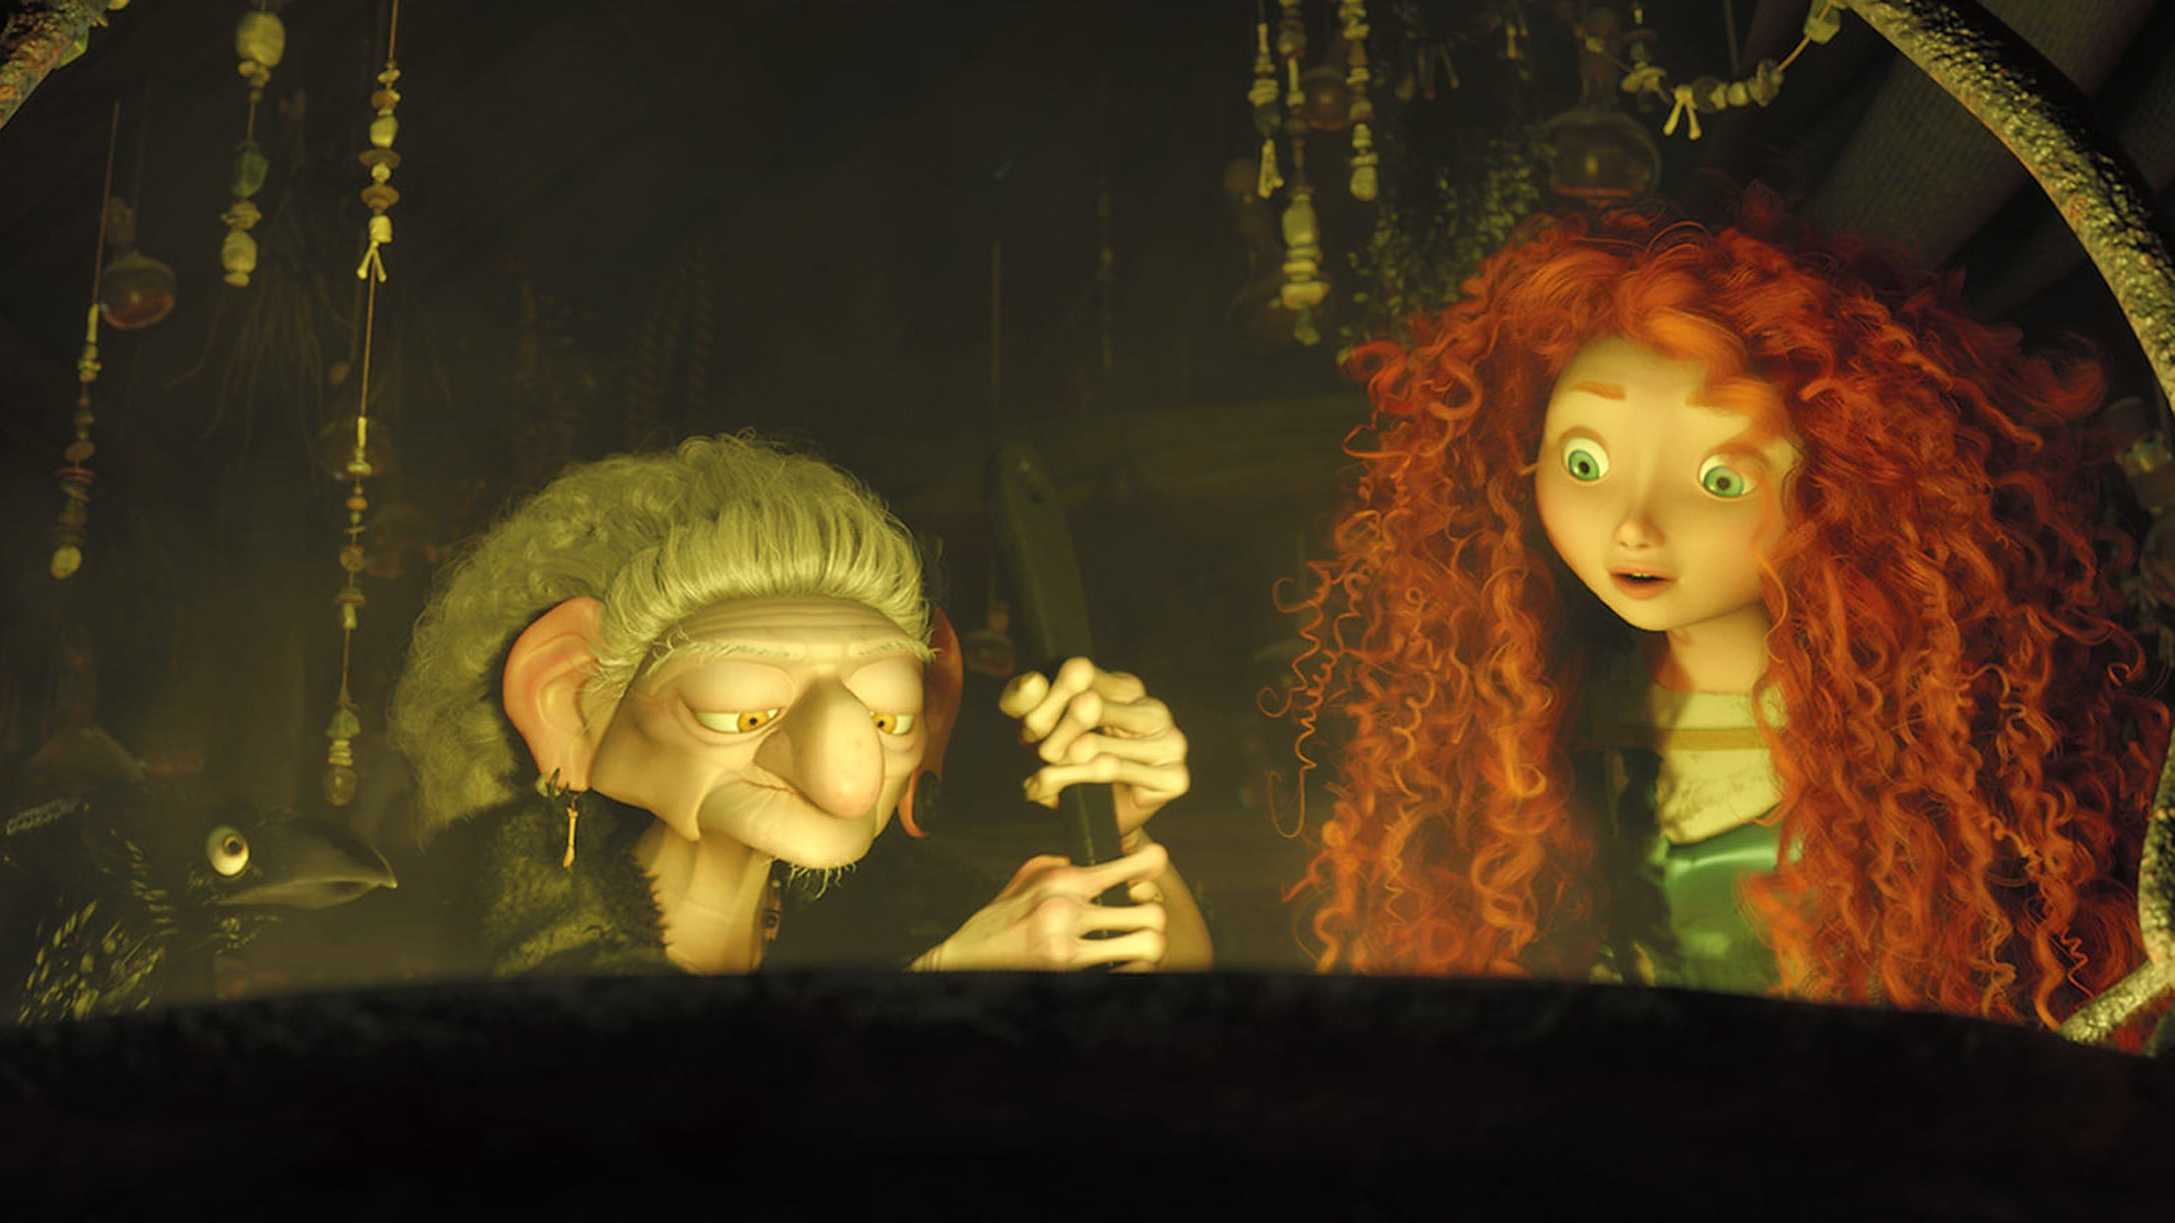 Merida watching as The Witch brews her a magical potion.